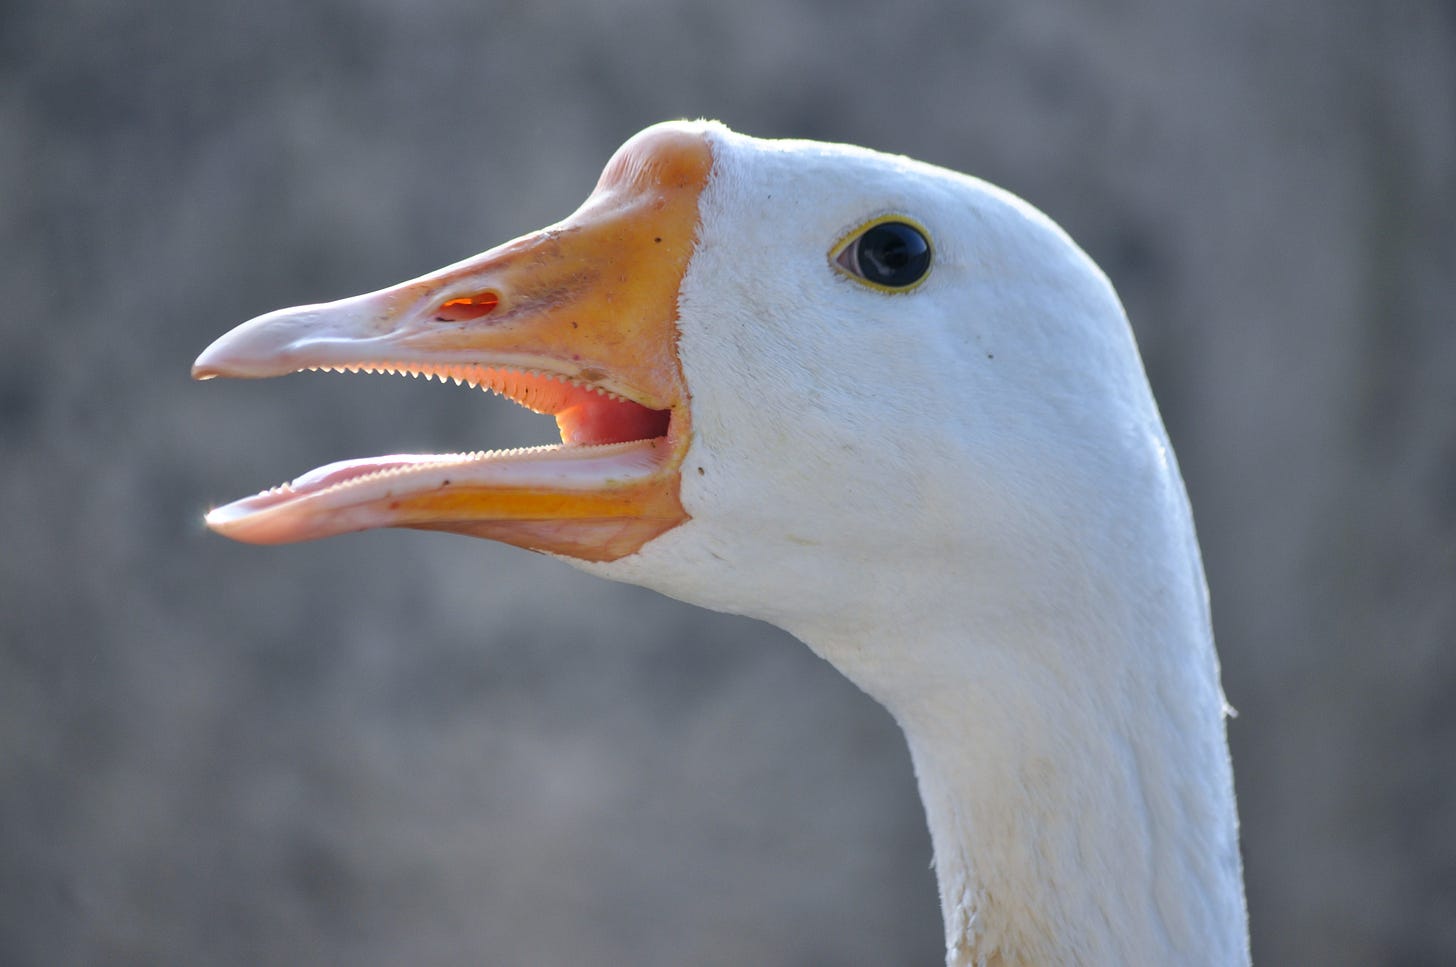 a close-up of a goose with it's mouth open